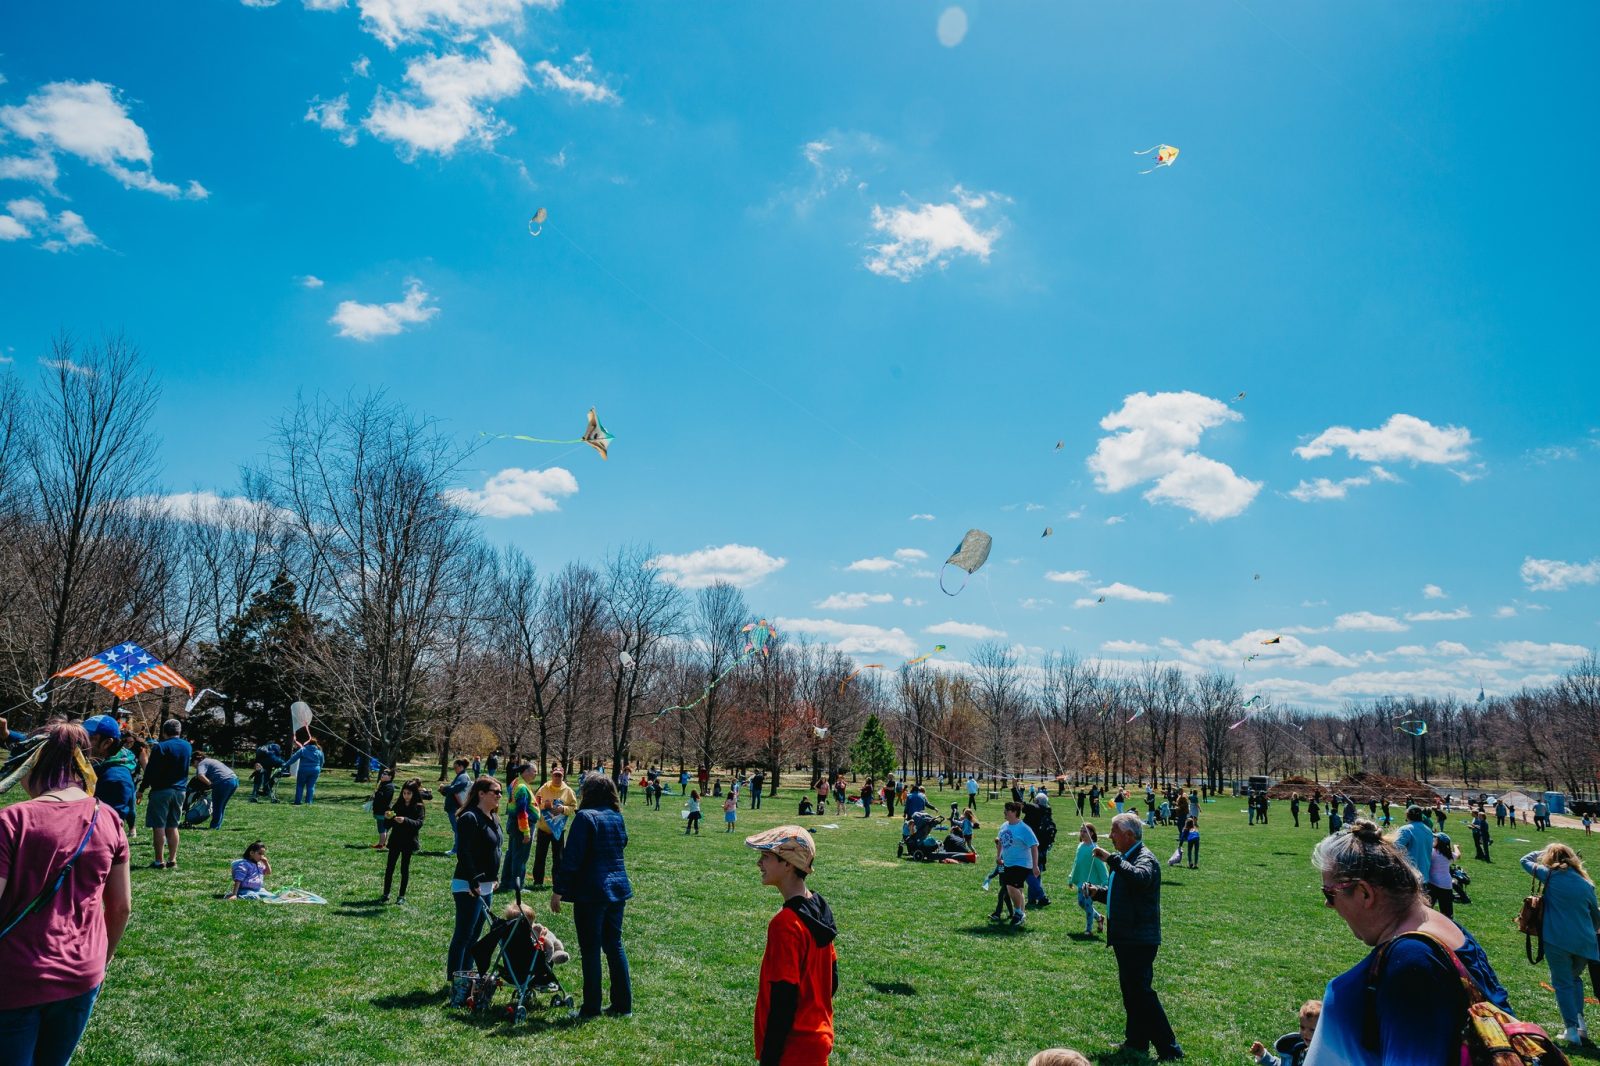 People fly kites in a green field underneath a blue sky